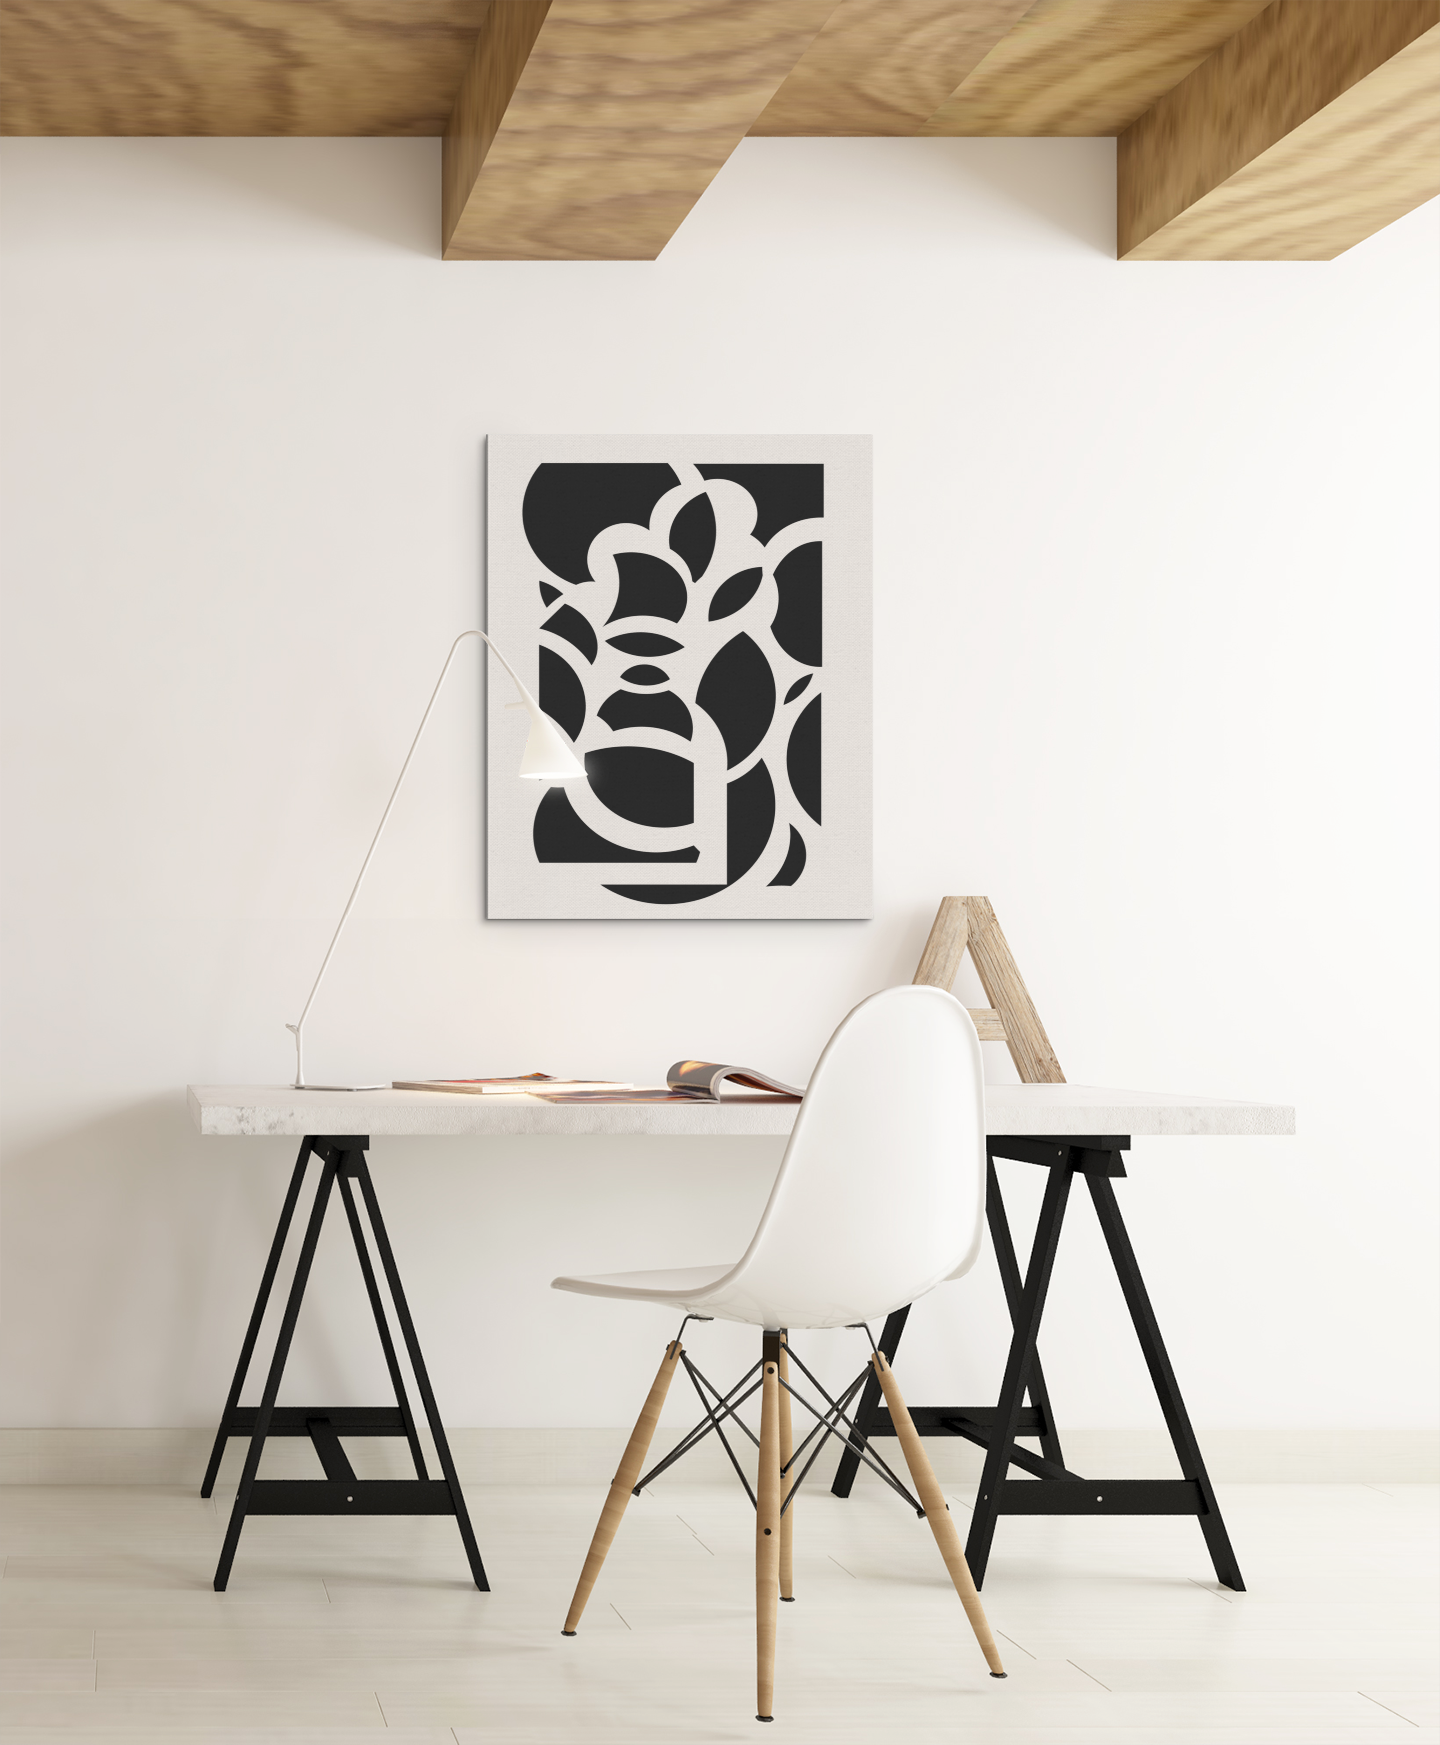 Modern Abstract Ciclres Wall Art Print